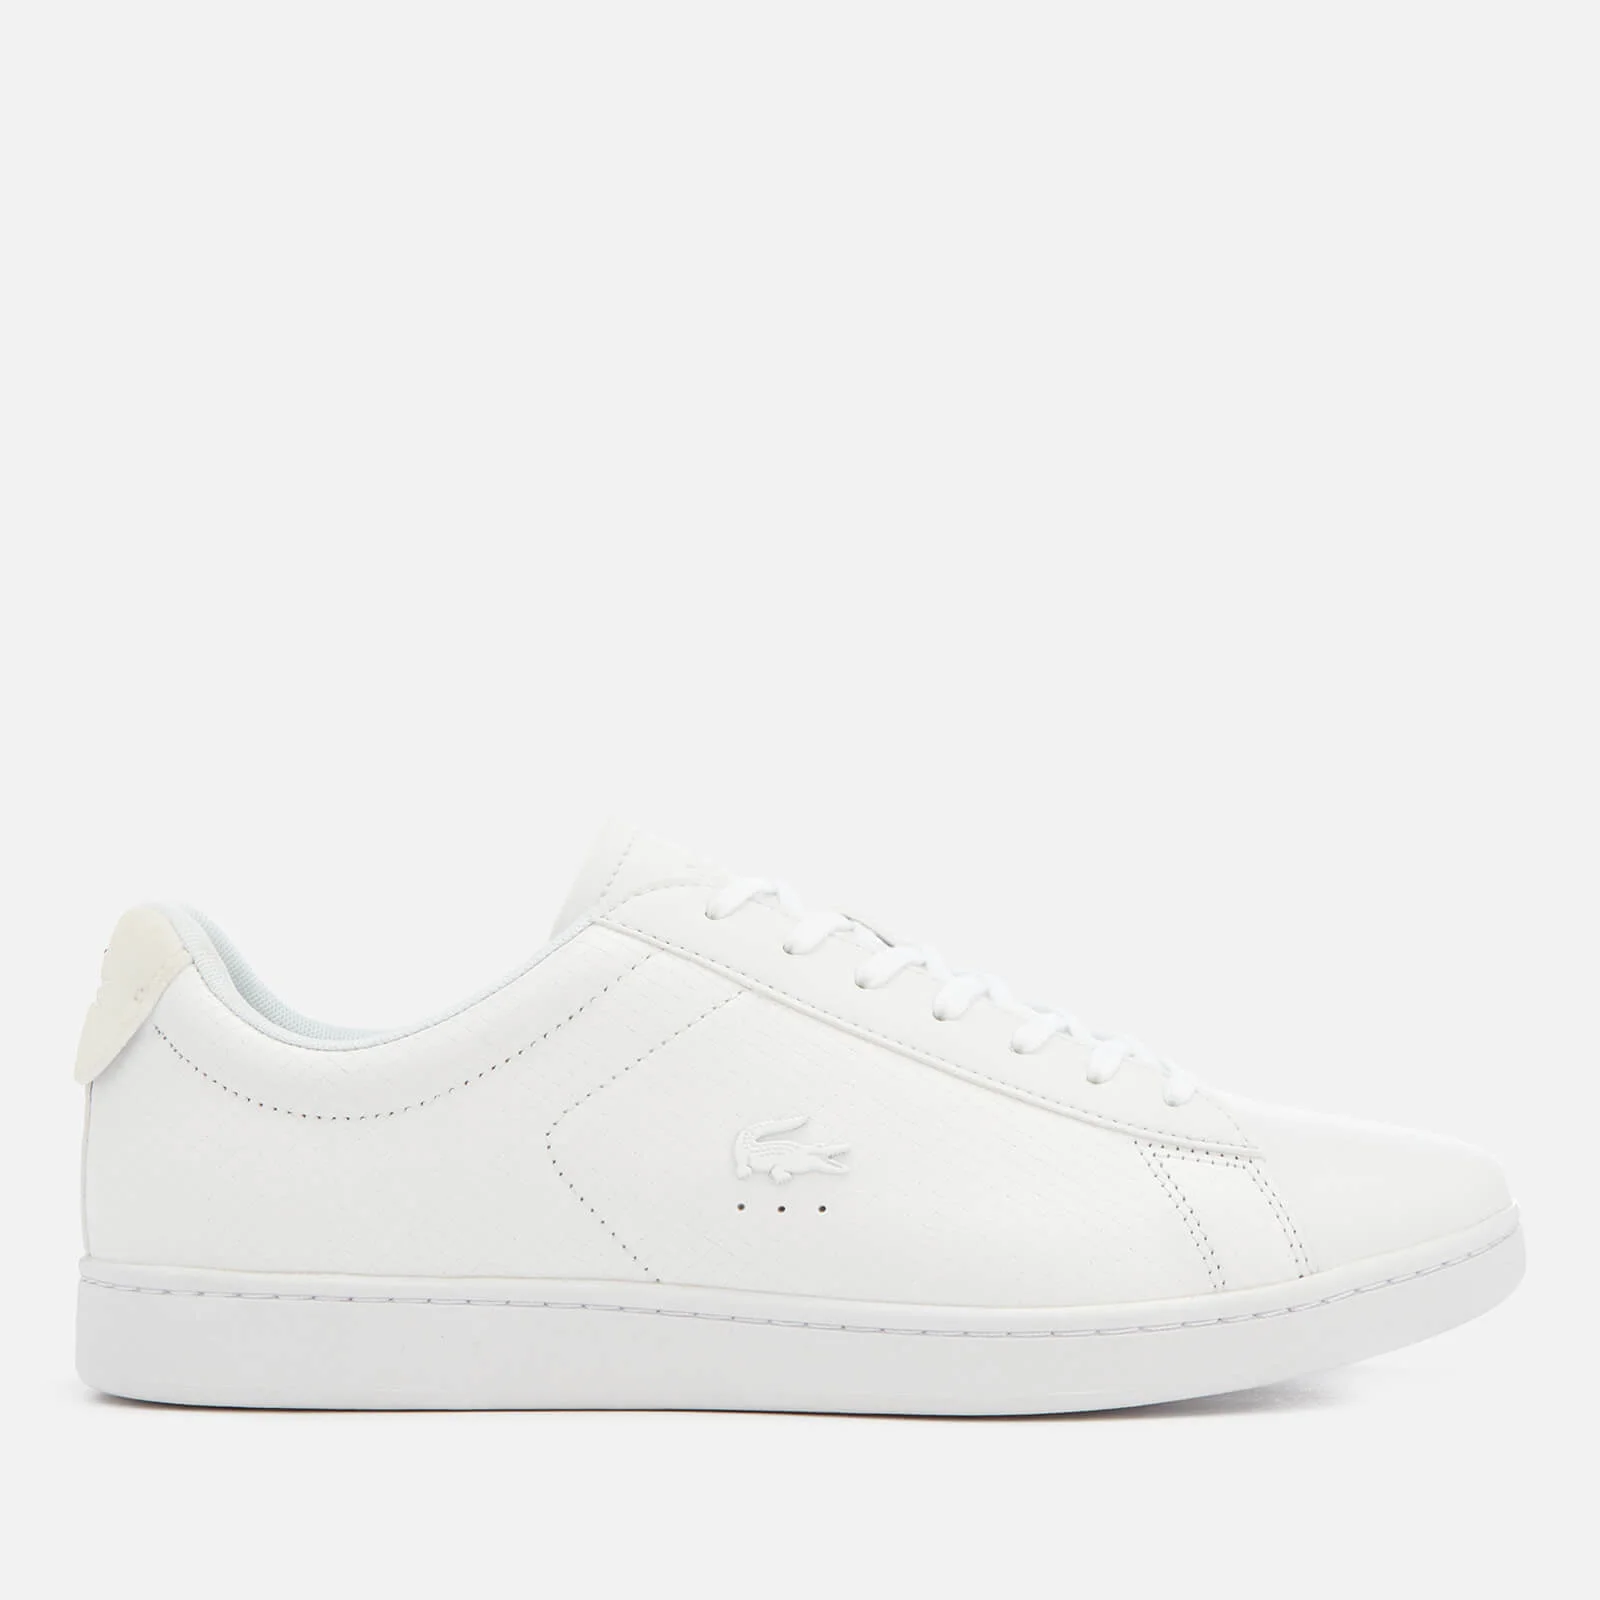 Lacoste Men's Carnaby Evo 318 7 Croc Leather Trainers - White Image 1